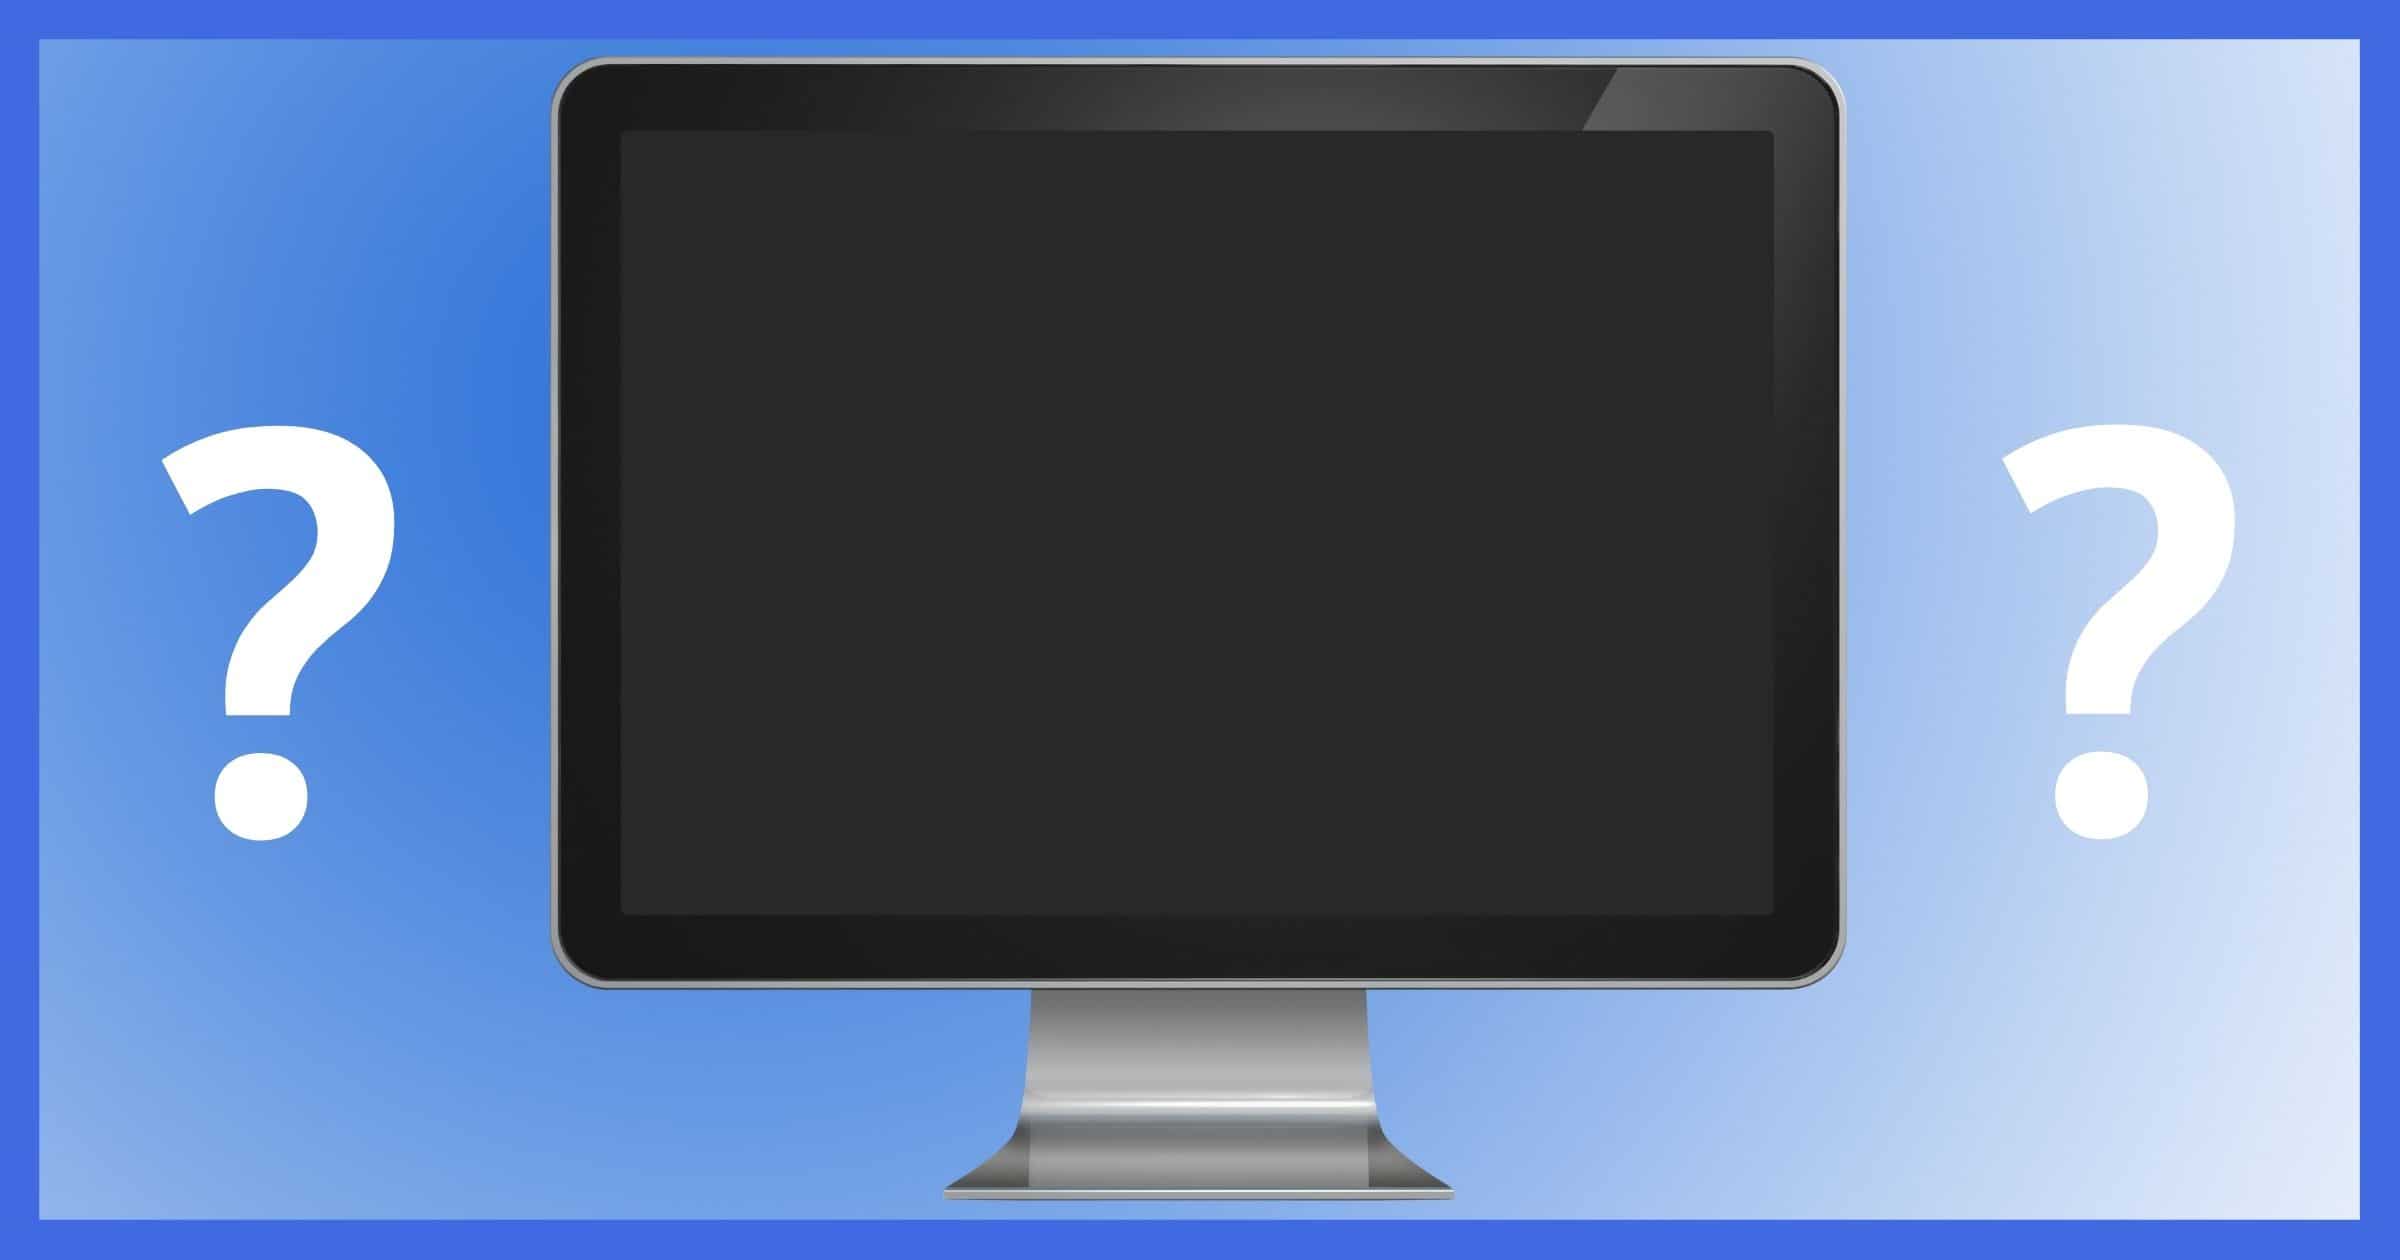 Disconnect the monitor from the current computer and connect it to another working computer.
If the monitor works fine on the other computer, the problem may lie with the original computer's hardware or software.